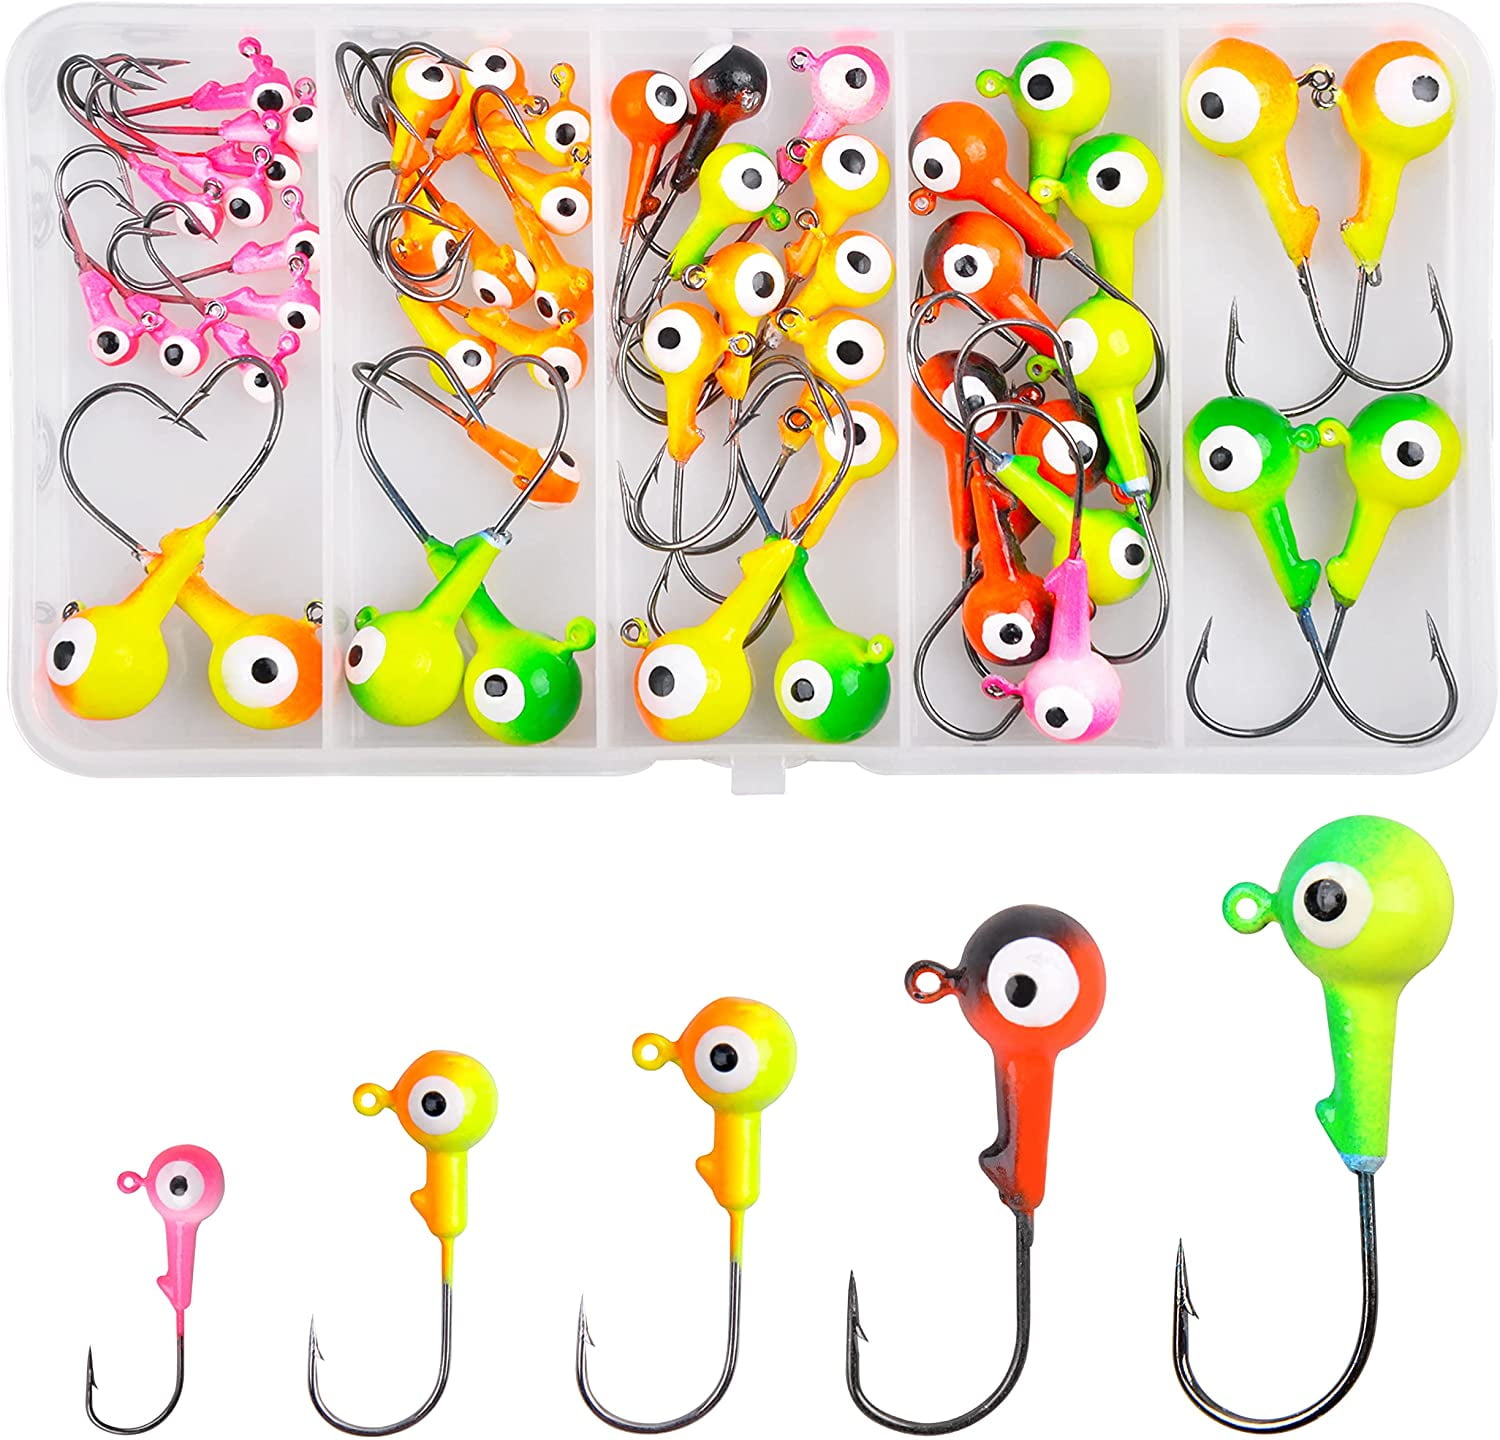  Goture 20Pcs Lead Head Jig Hooks Set Kit - Unpainted  Freshwater Saltwater Fishing Jig Hooks for Bass Crappie Trout Panfish :  Sports & Outdoors